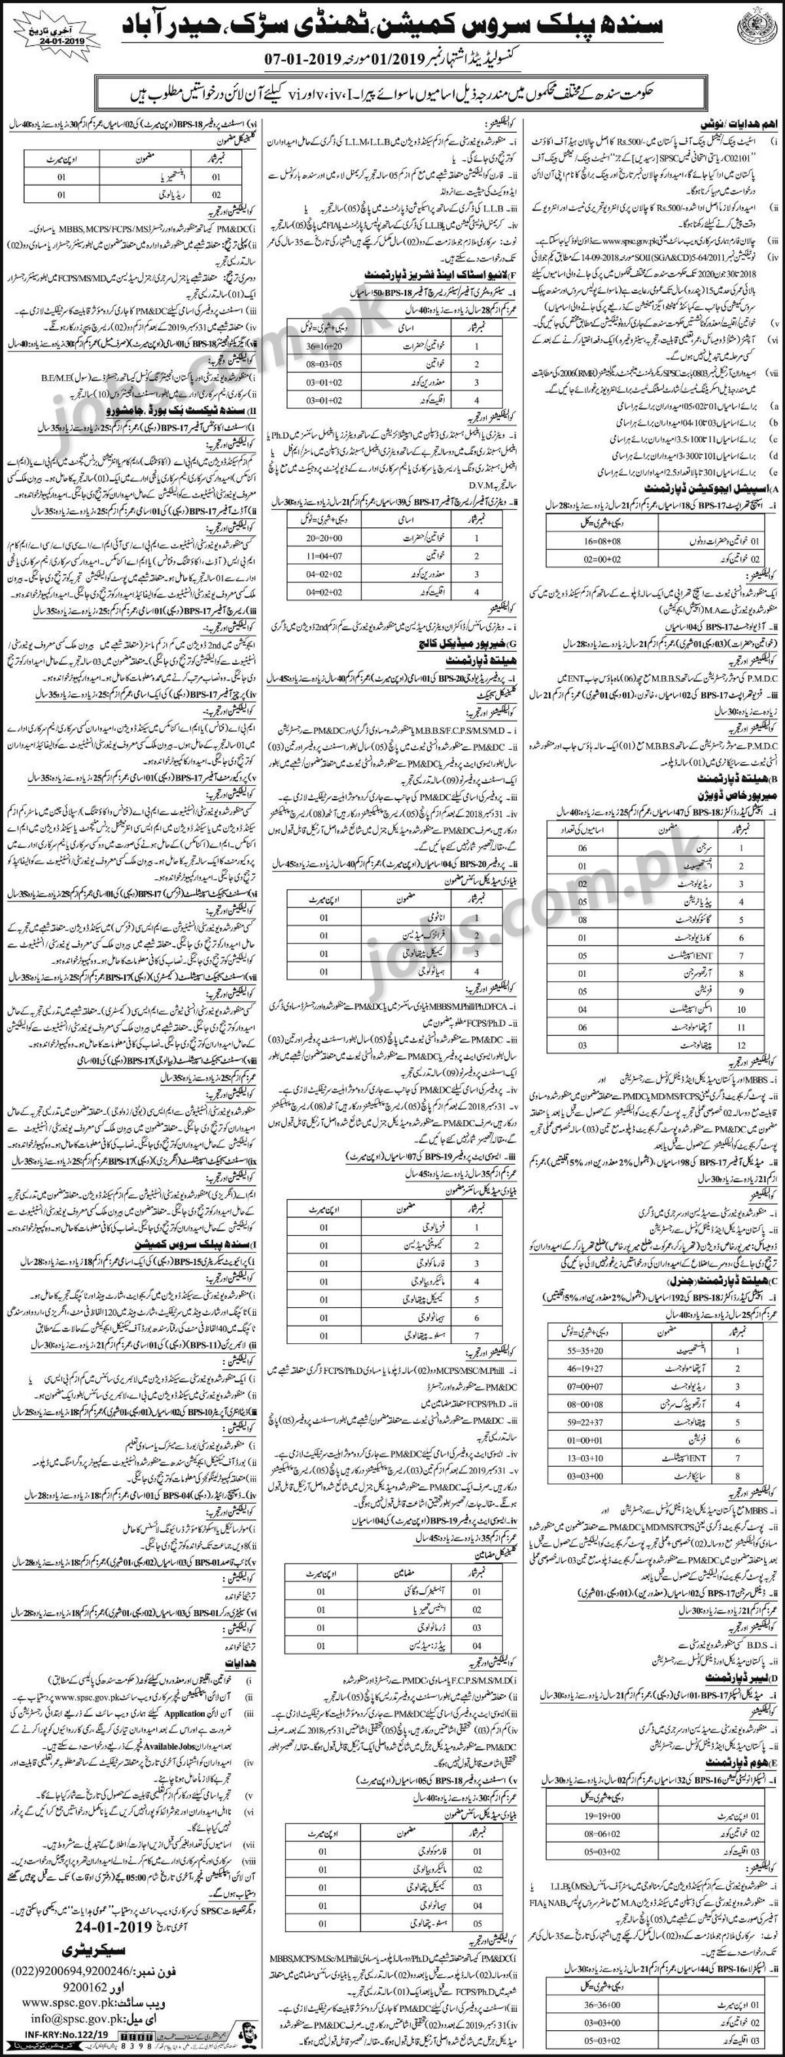 SPSC Jobs (1/2019): 572+ Medical, Inspectors, Doctors, Research Officers, Teaching, DEO & Other Posts in Sindh Government